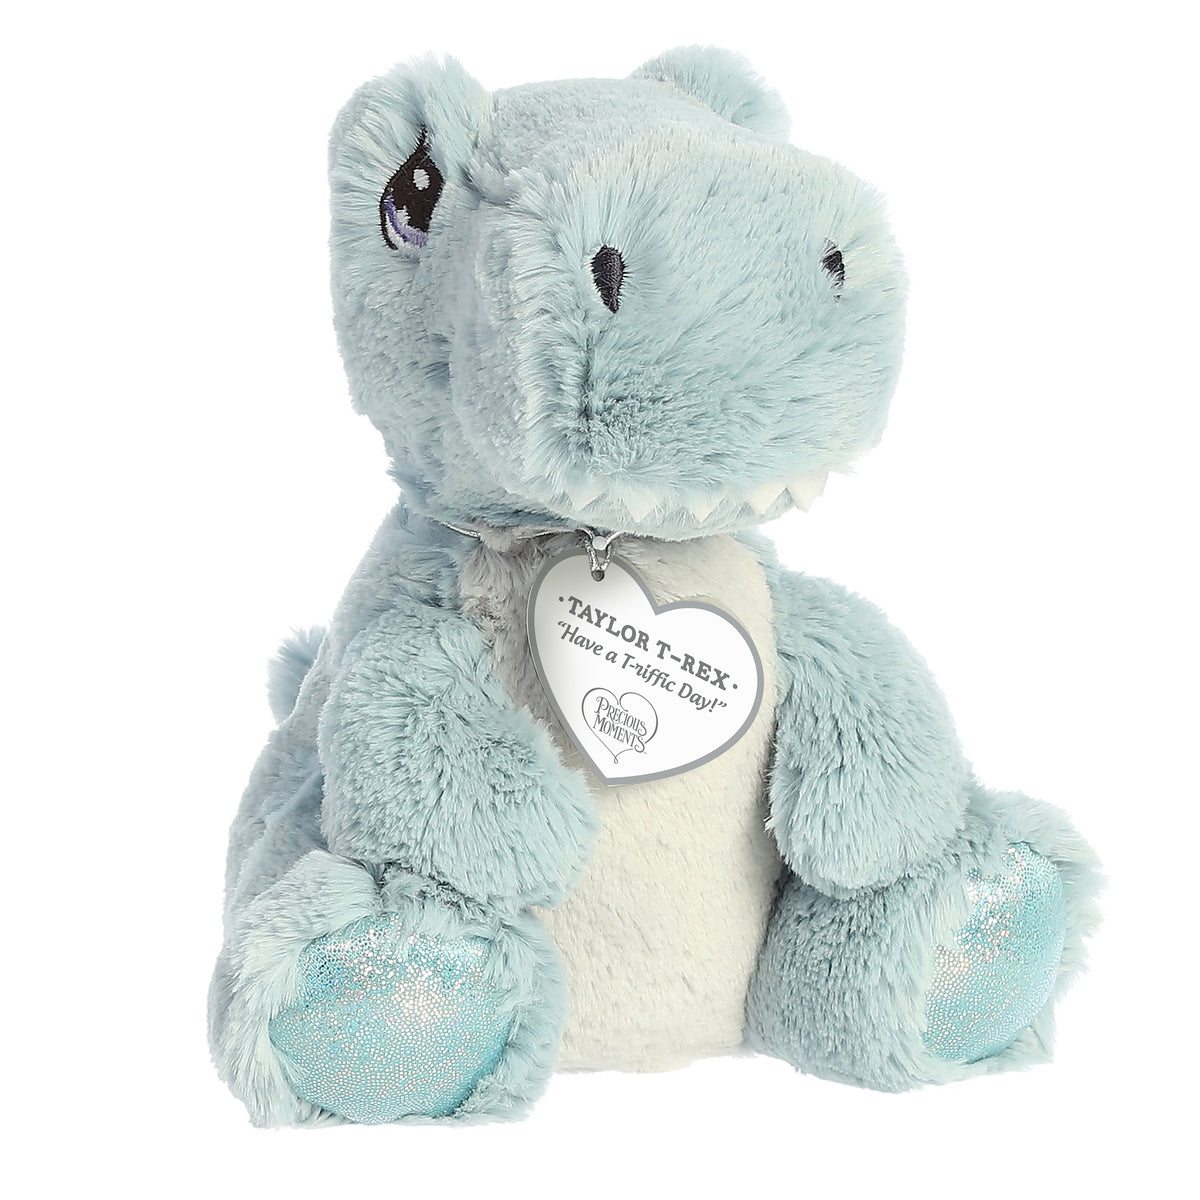 A seated baby blue t-rex dino plush with tear-drop eyes and a precious moments inspirational tag around its neck.